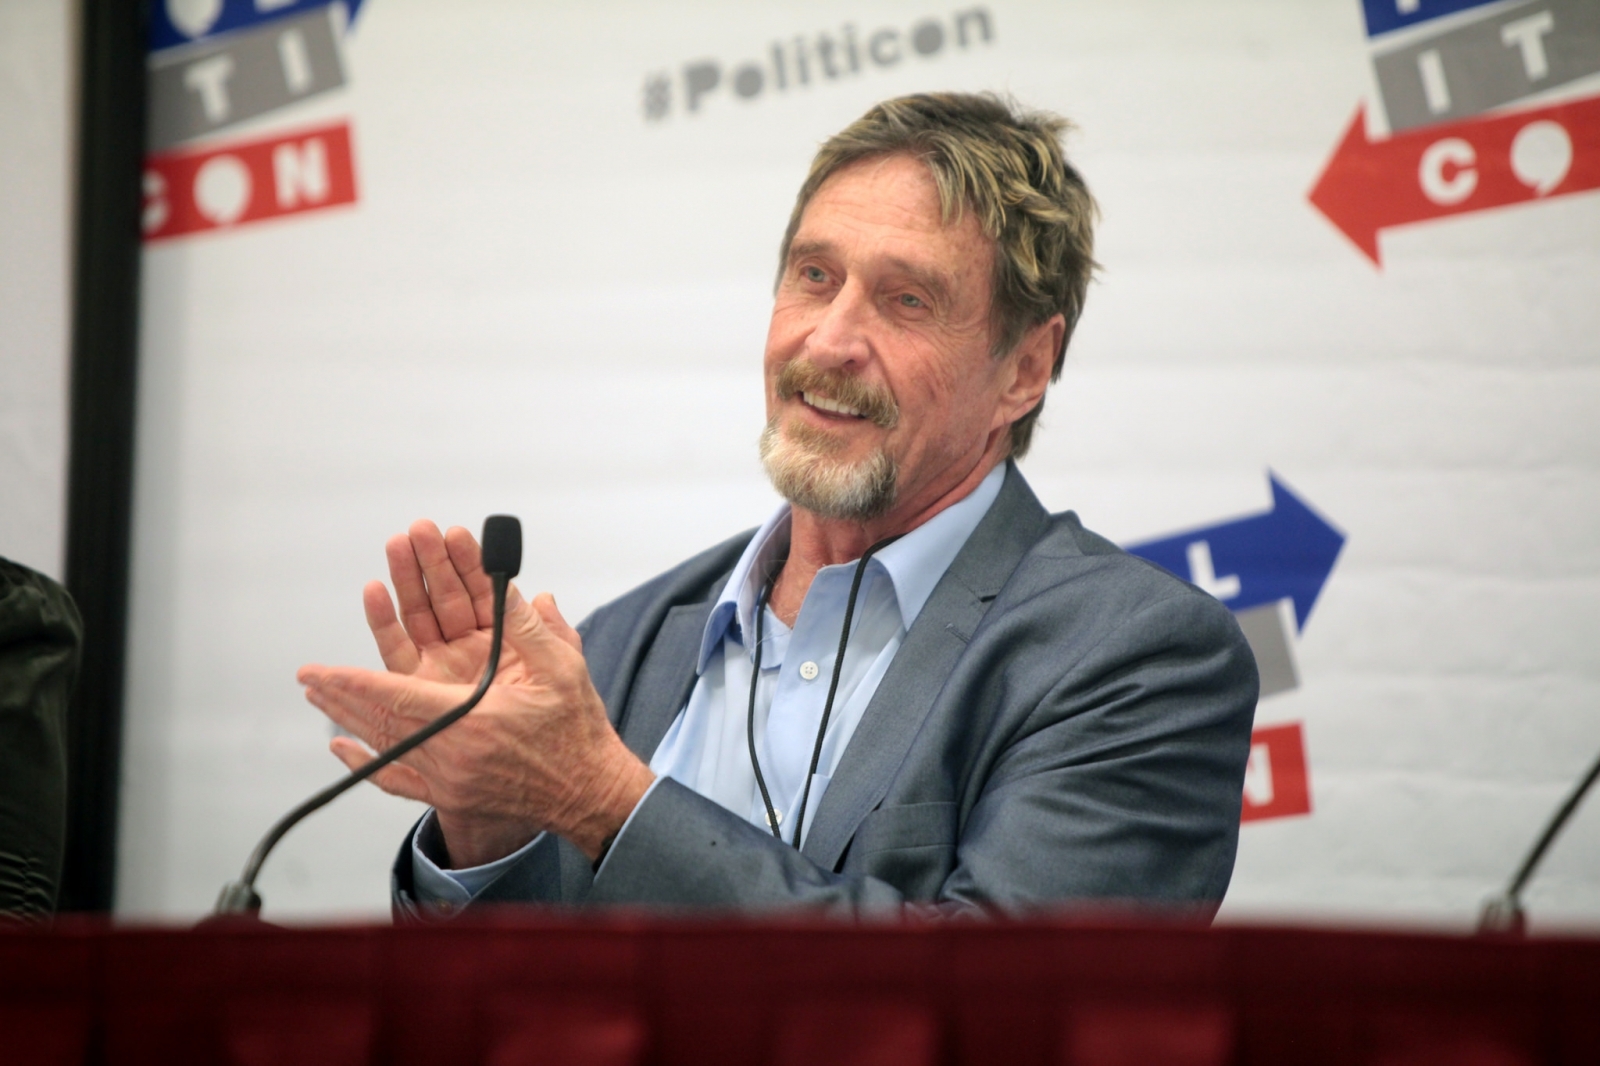 John McAfee calm on bitcoin crash: 'Relax everyone, cryptocurrency can't be stopped' | IBTimes